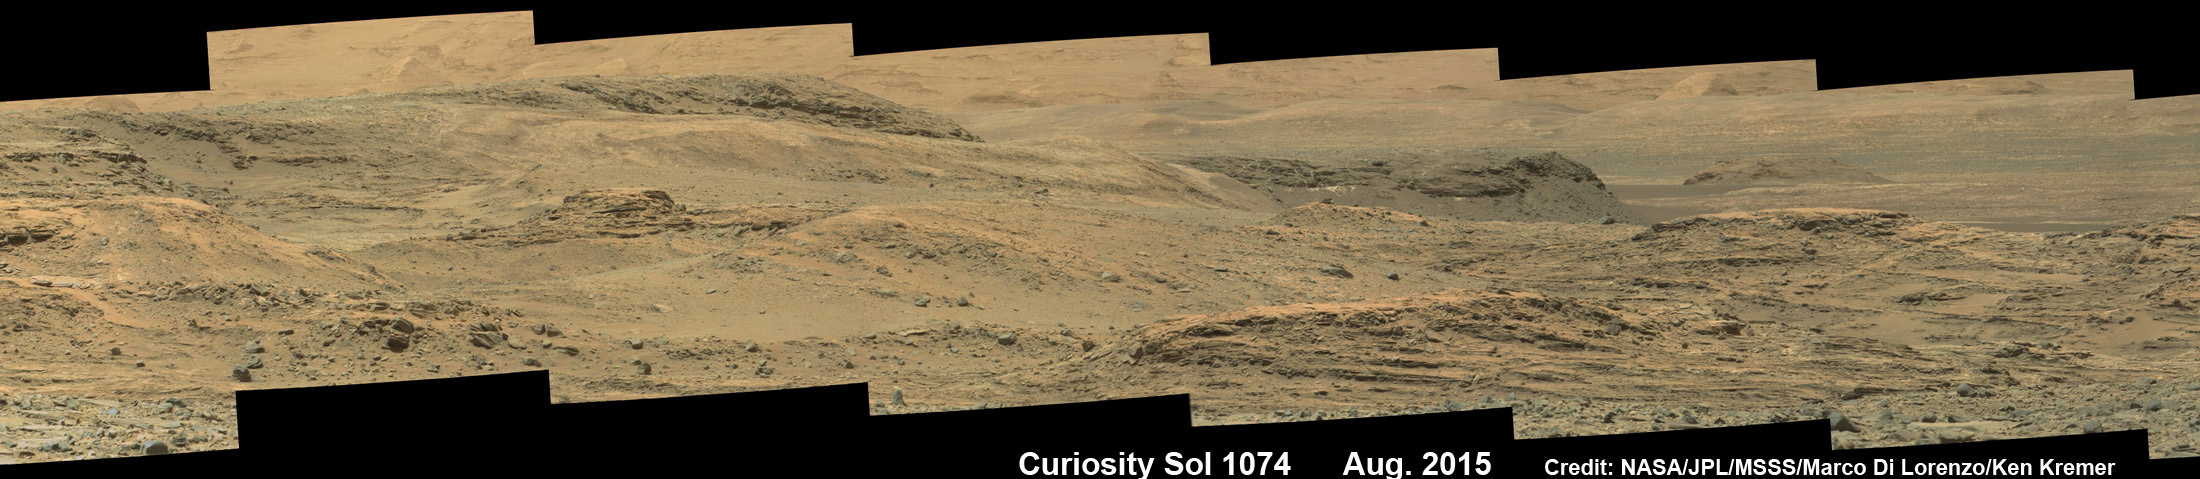 Curiosity rover scans toward south east around Marias Pass area at the base of Mount Sharp on Mars on Sol 1074, Aug. 14, 2015 in this photo mosaic stitched from Mastcam color camera raw images.  Credit: NASA/JPL/MSSS/Marco Di Lorenzo/Ken Kremer/kenkremer.com